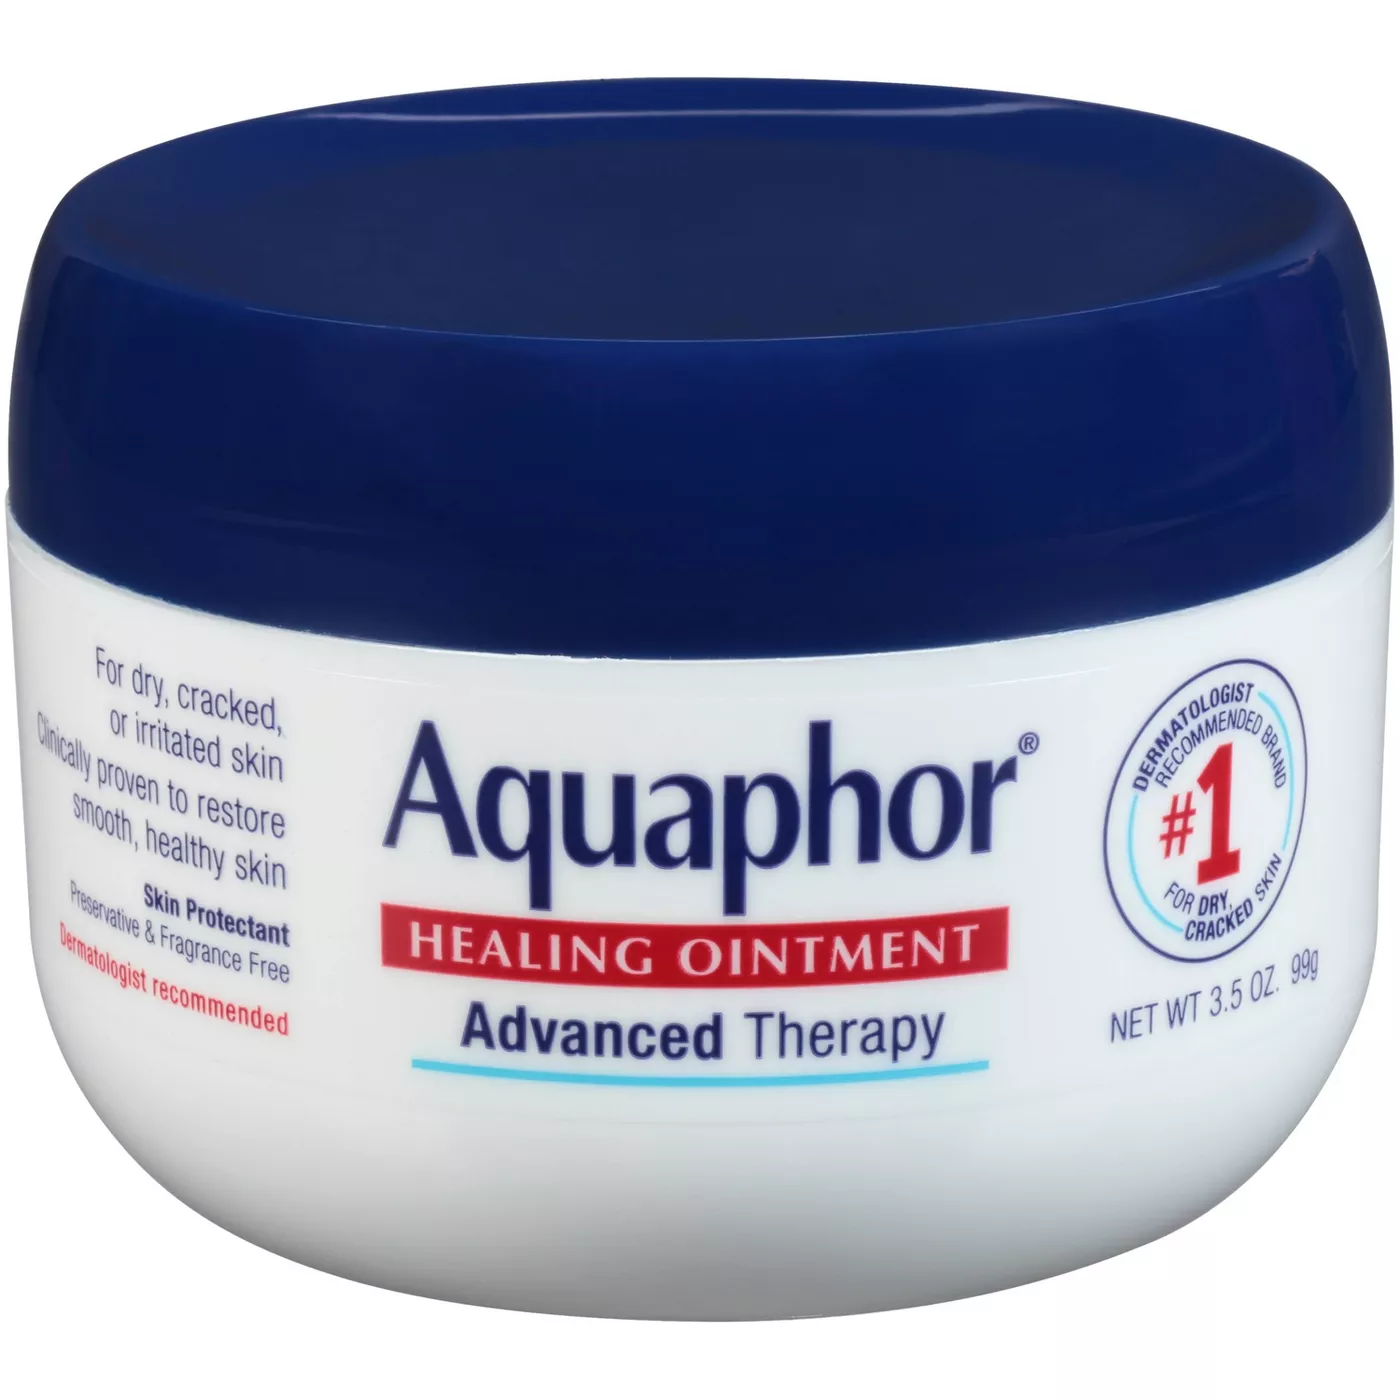 Aquaphor Healing Ointment For Dry & Cracked Skin - 3.5oz - image 1 of 5